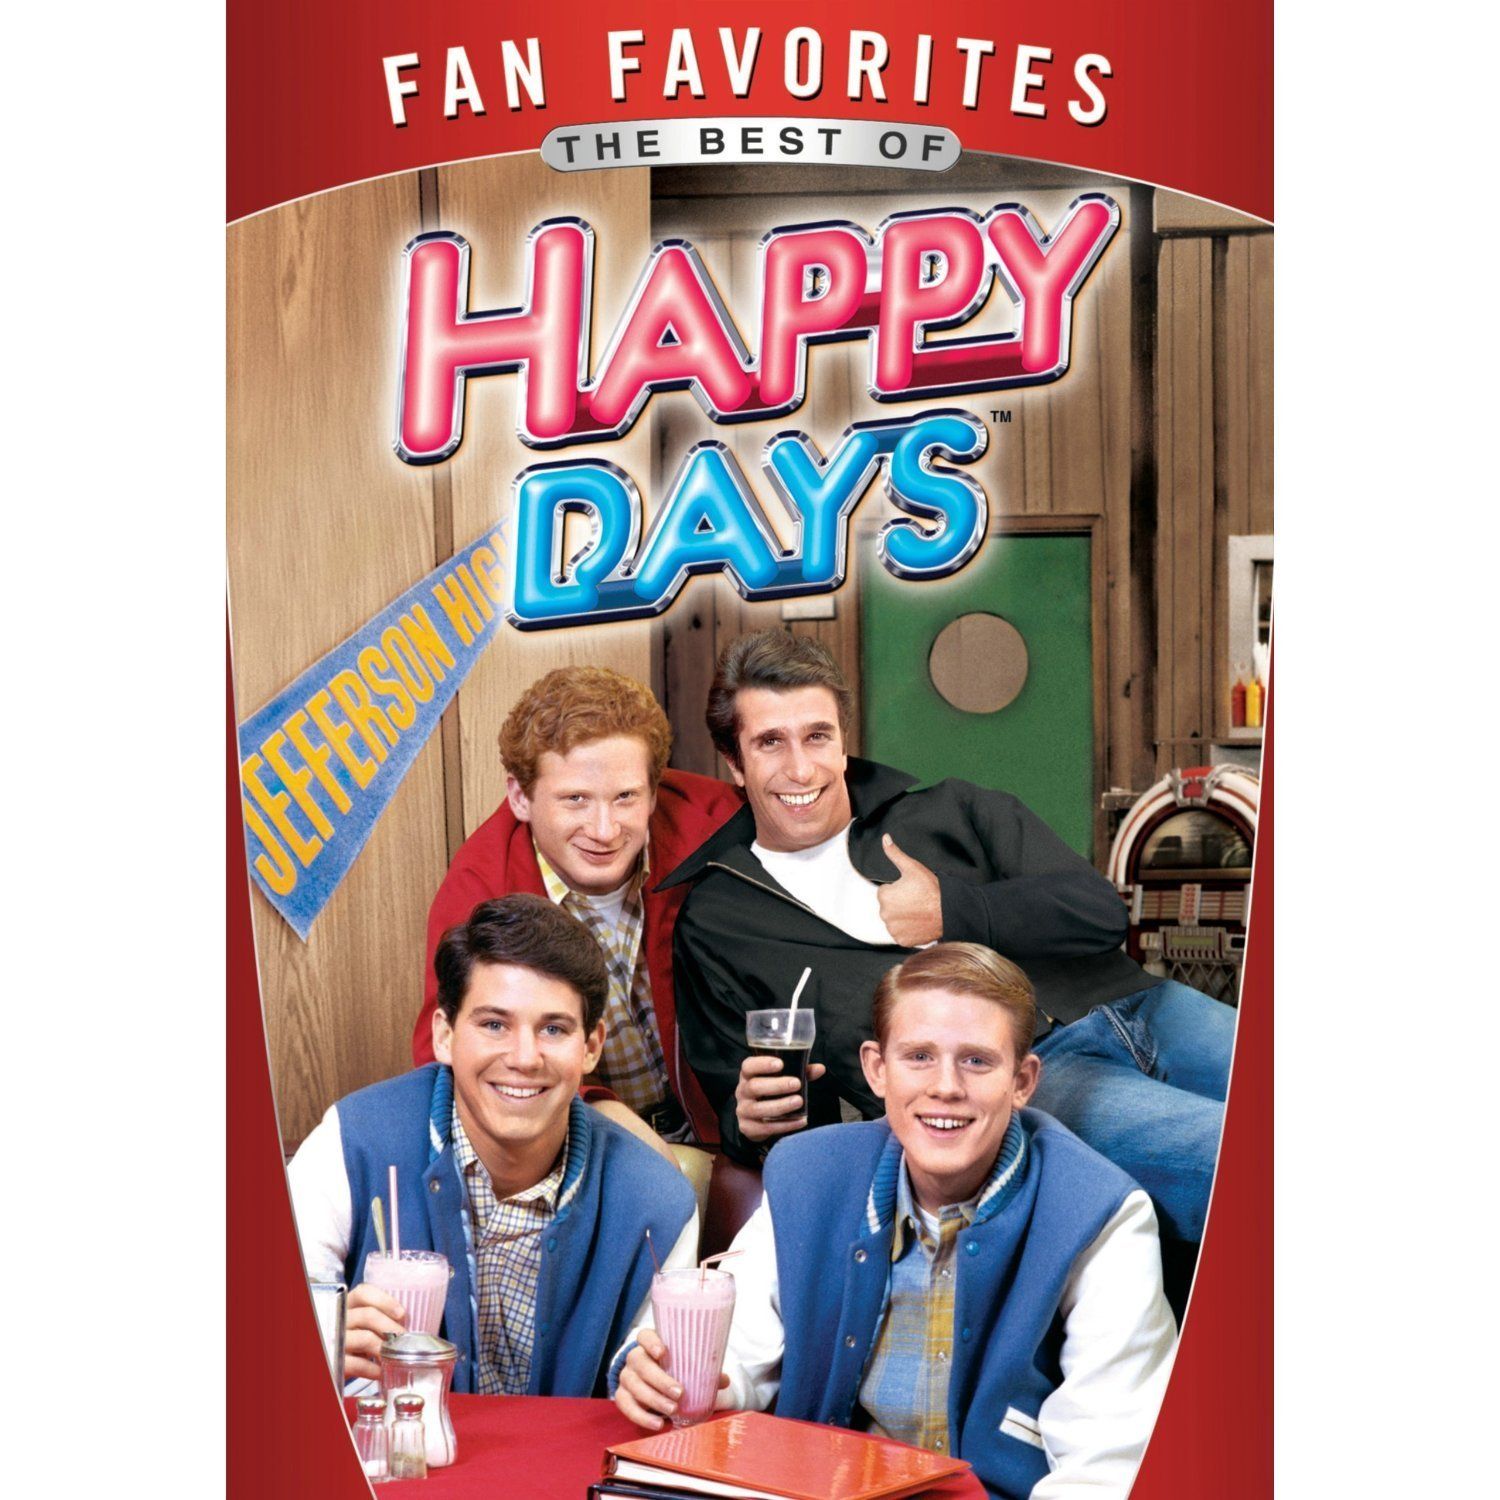 Happy Days Tv Show Pictures Wallpaper Far Favrjfes